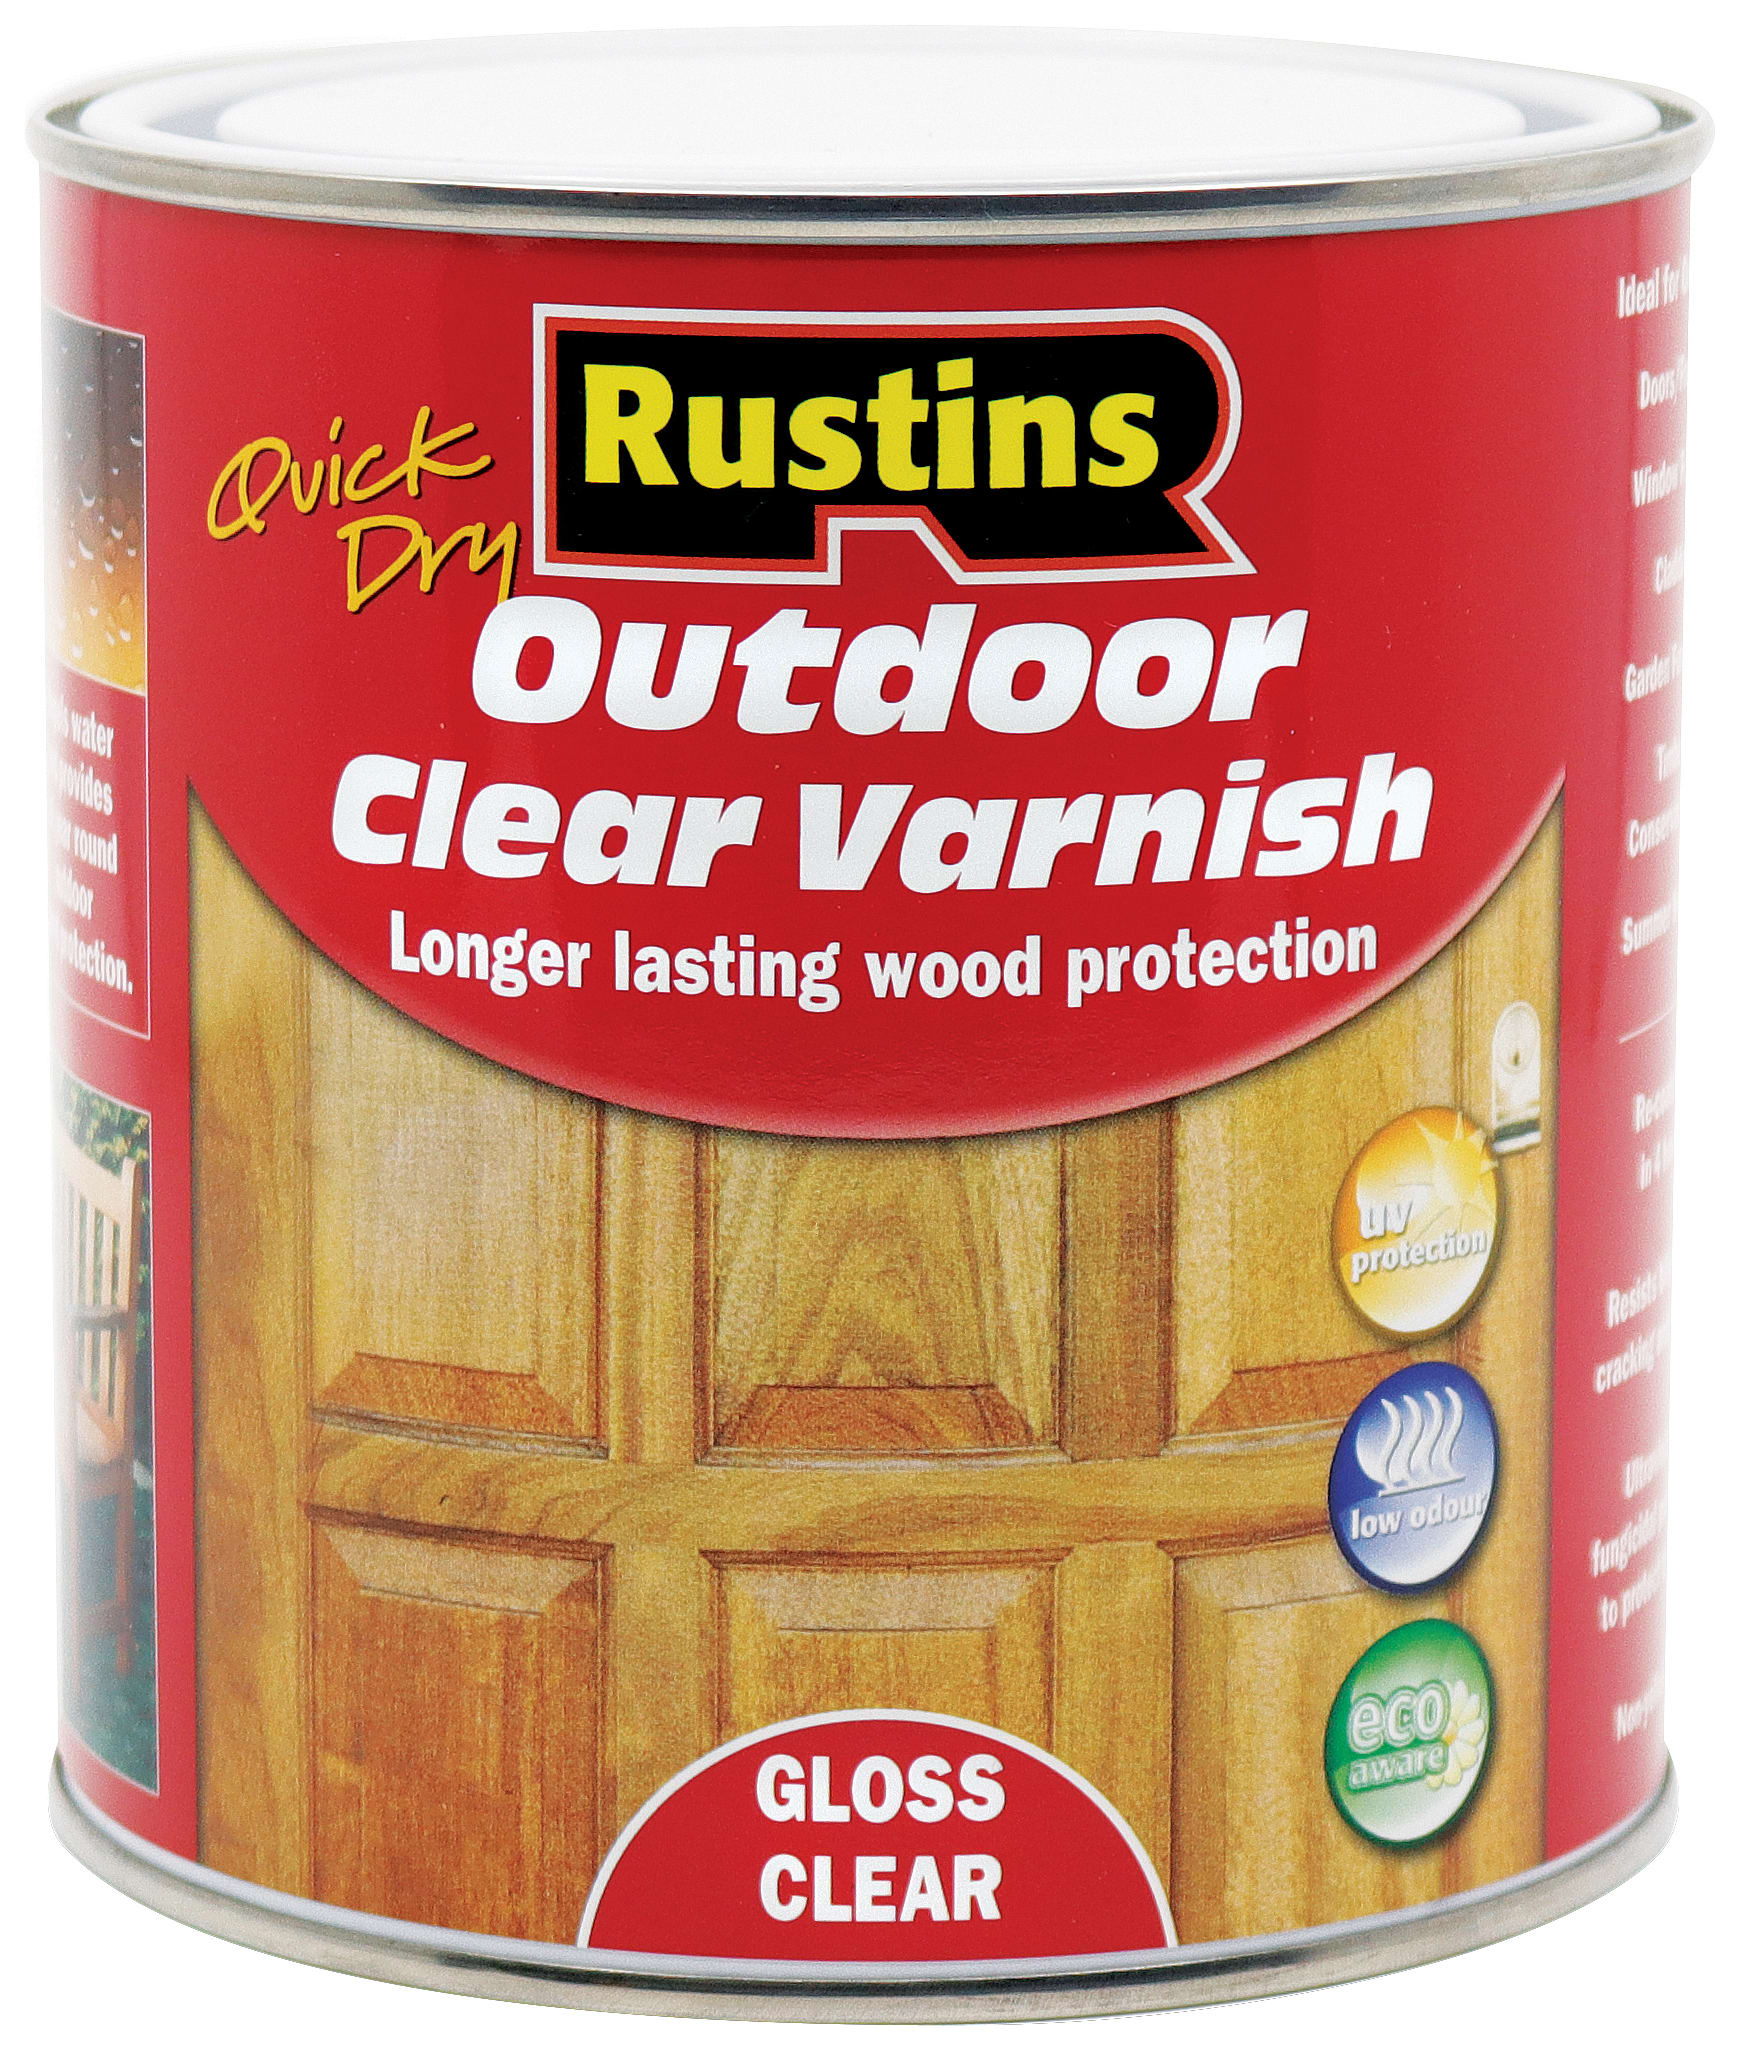 Rustins Quick Dry Outdoor Varnish - Clear Gloss